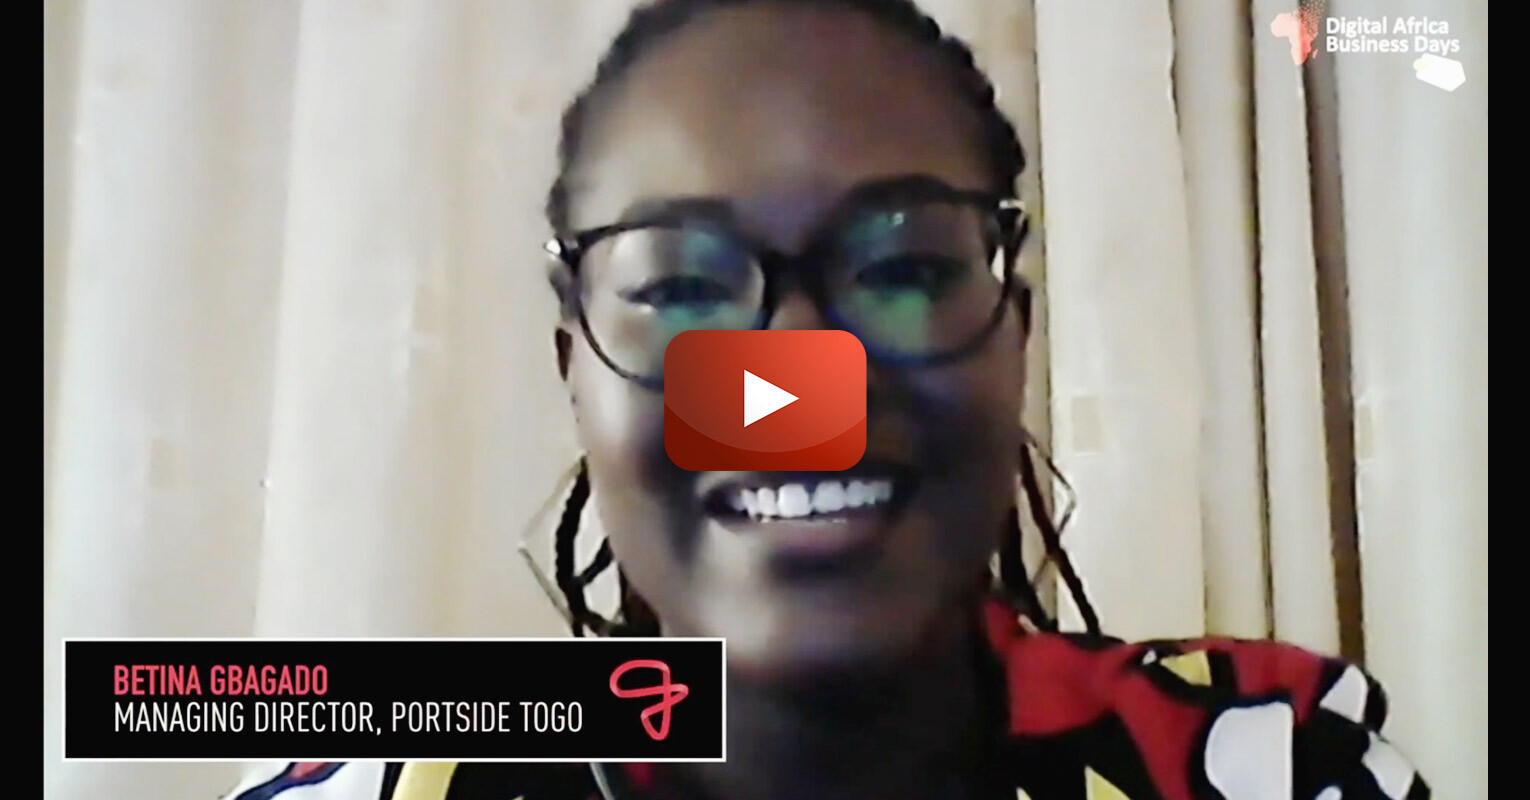 Betina Gbagado - Managing Director of Portside Togo was Featured in Digital Africa Business Days